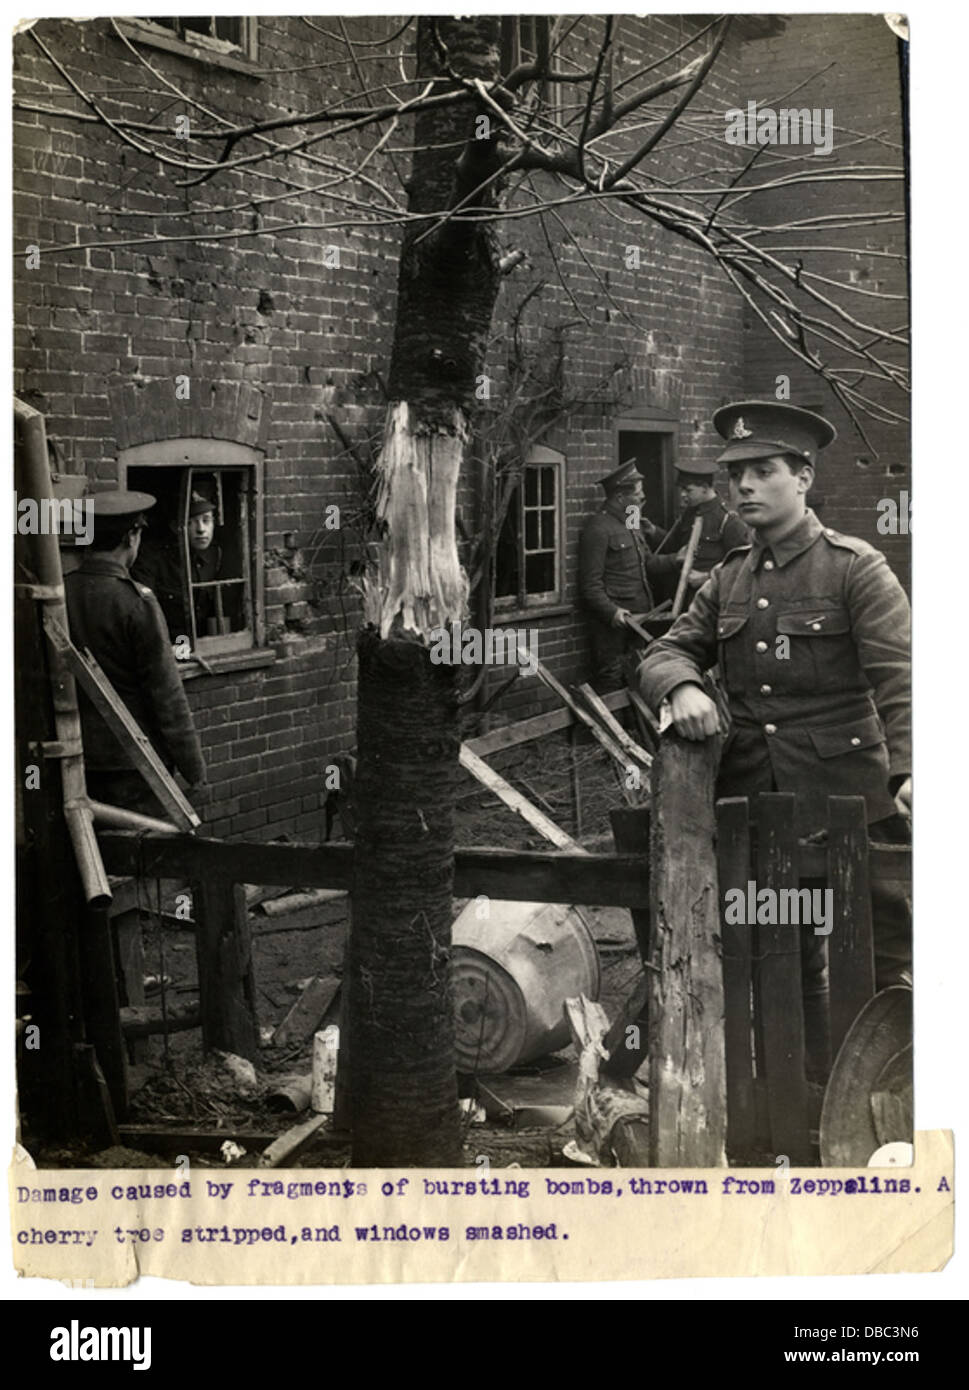 Damage caused by fragments of bursting bombs, thrown from zeppelins (Photo 24-28) Stock Photo